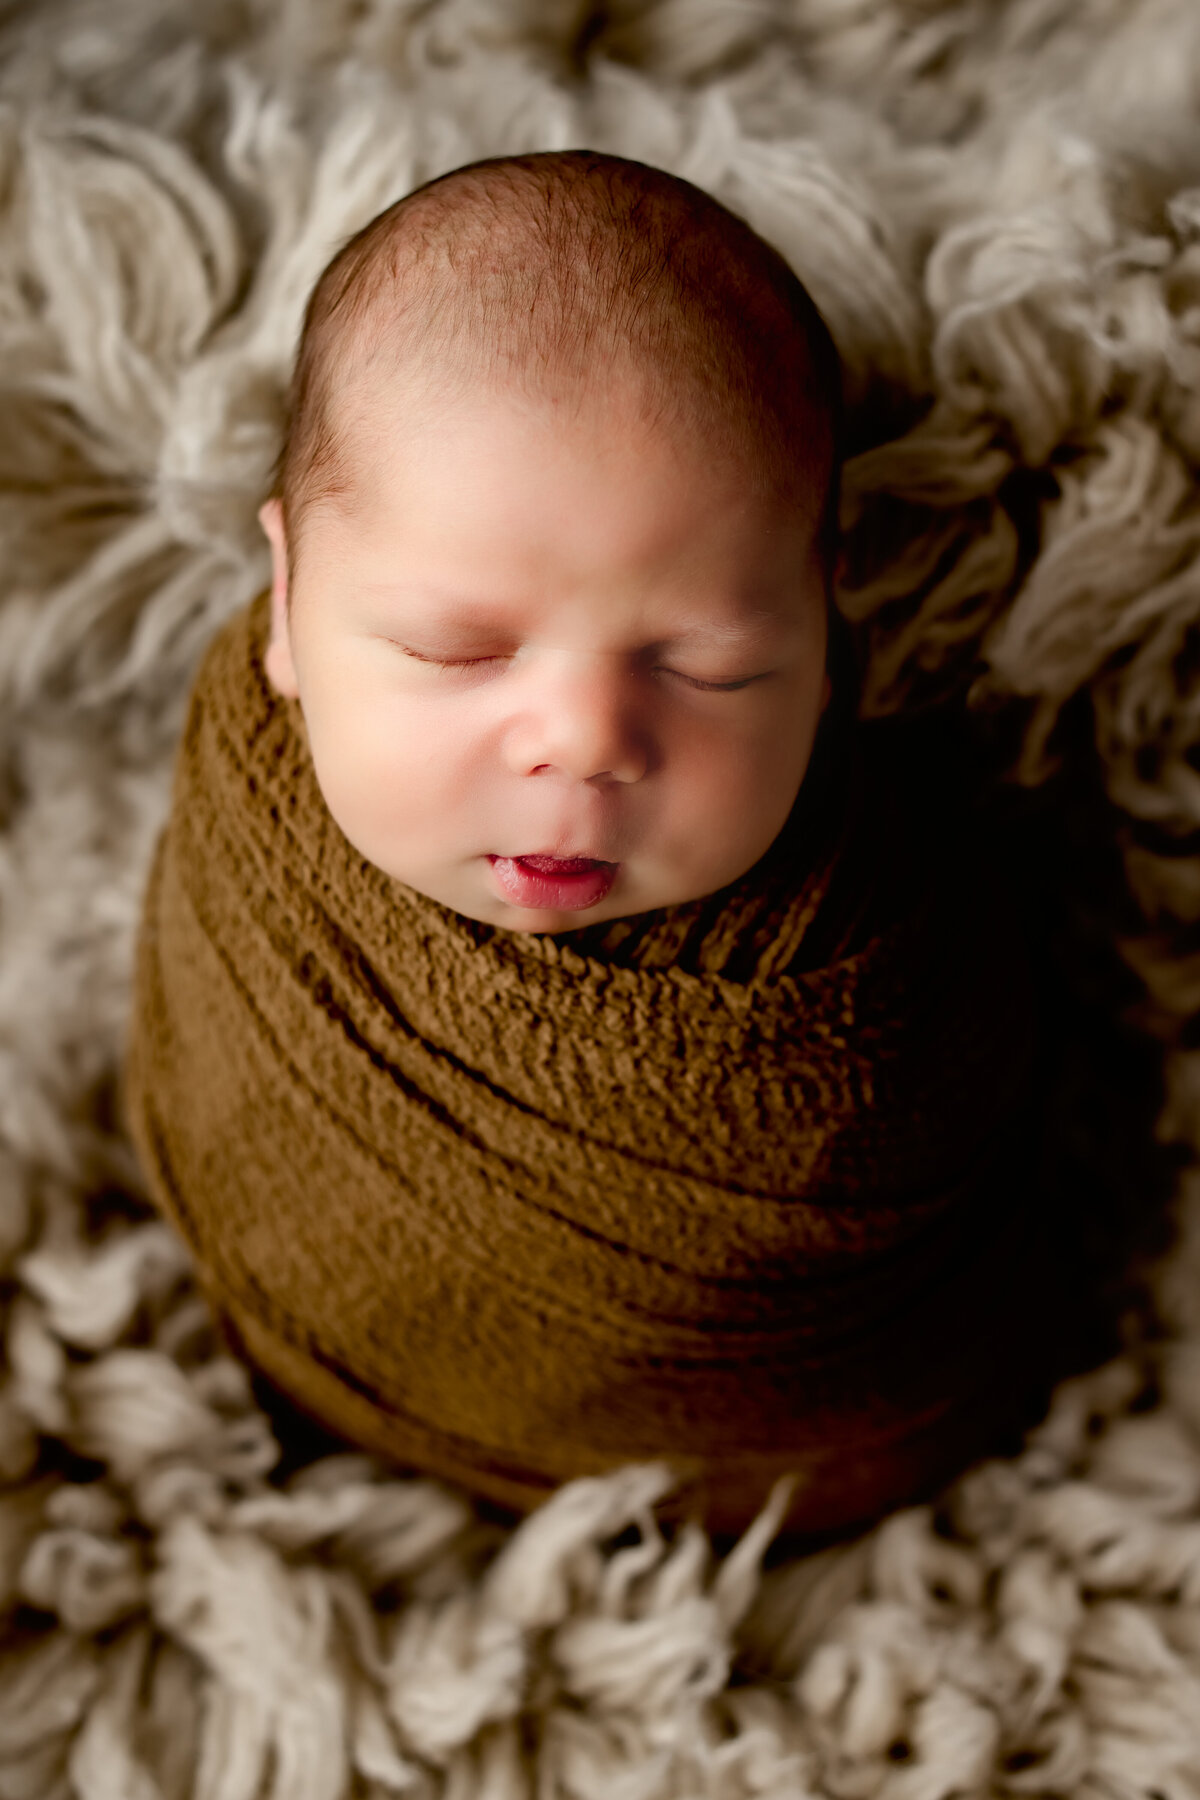 The Woodlands, Tx little baby boy wrapped up photoshoot